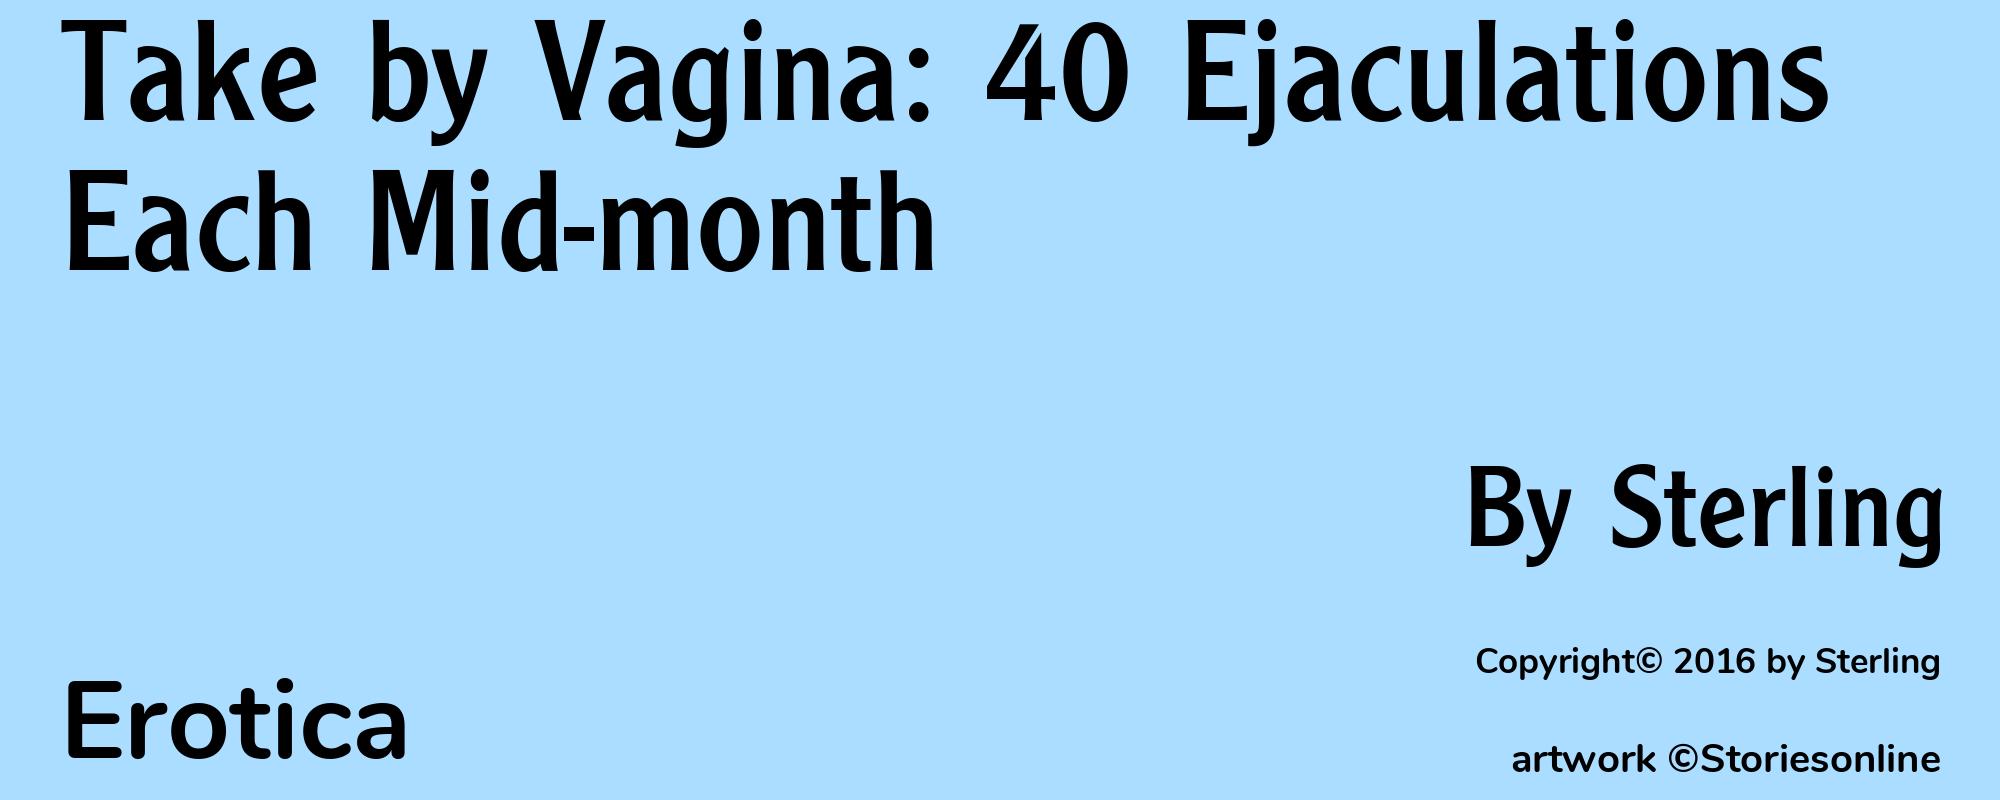 Take by Vagina: 40 Ejaculations Each Mid-month - Cover